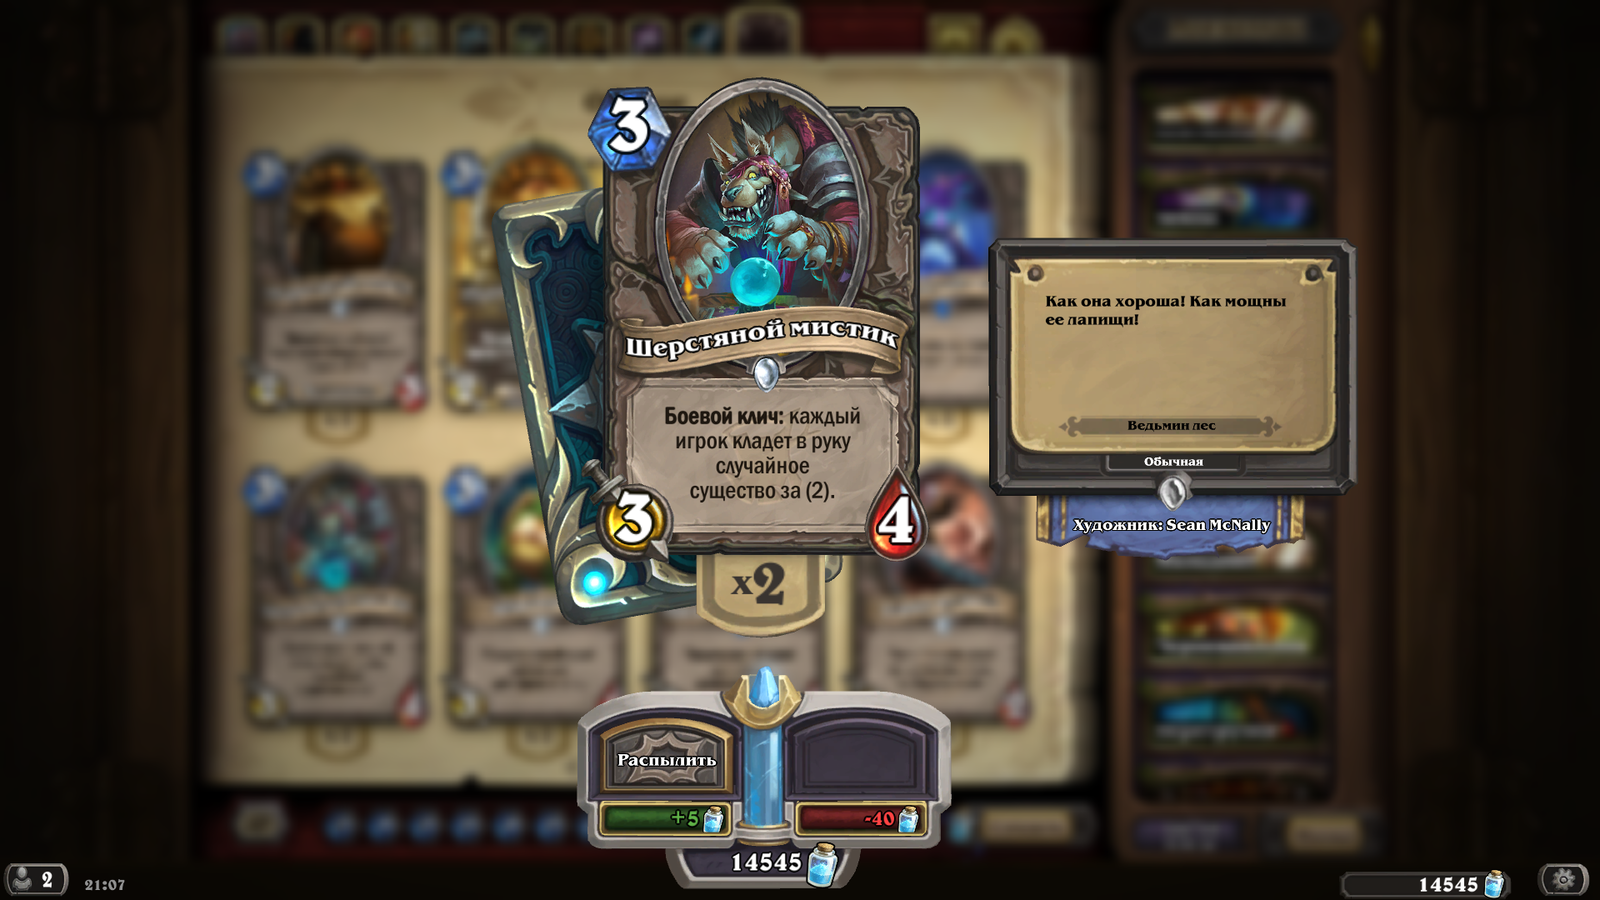 The Blizzard translators are aware of our Internet memes. - My, , Memes, New content, Hearthstone